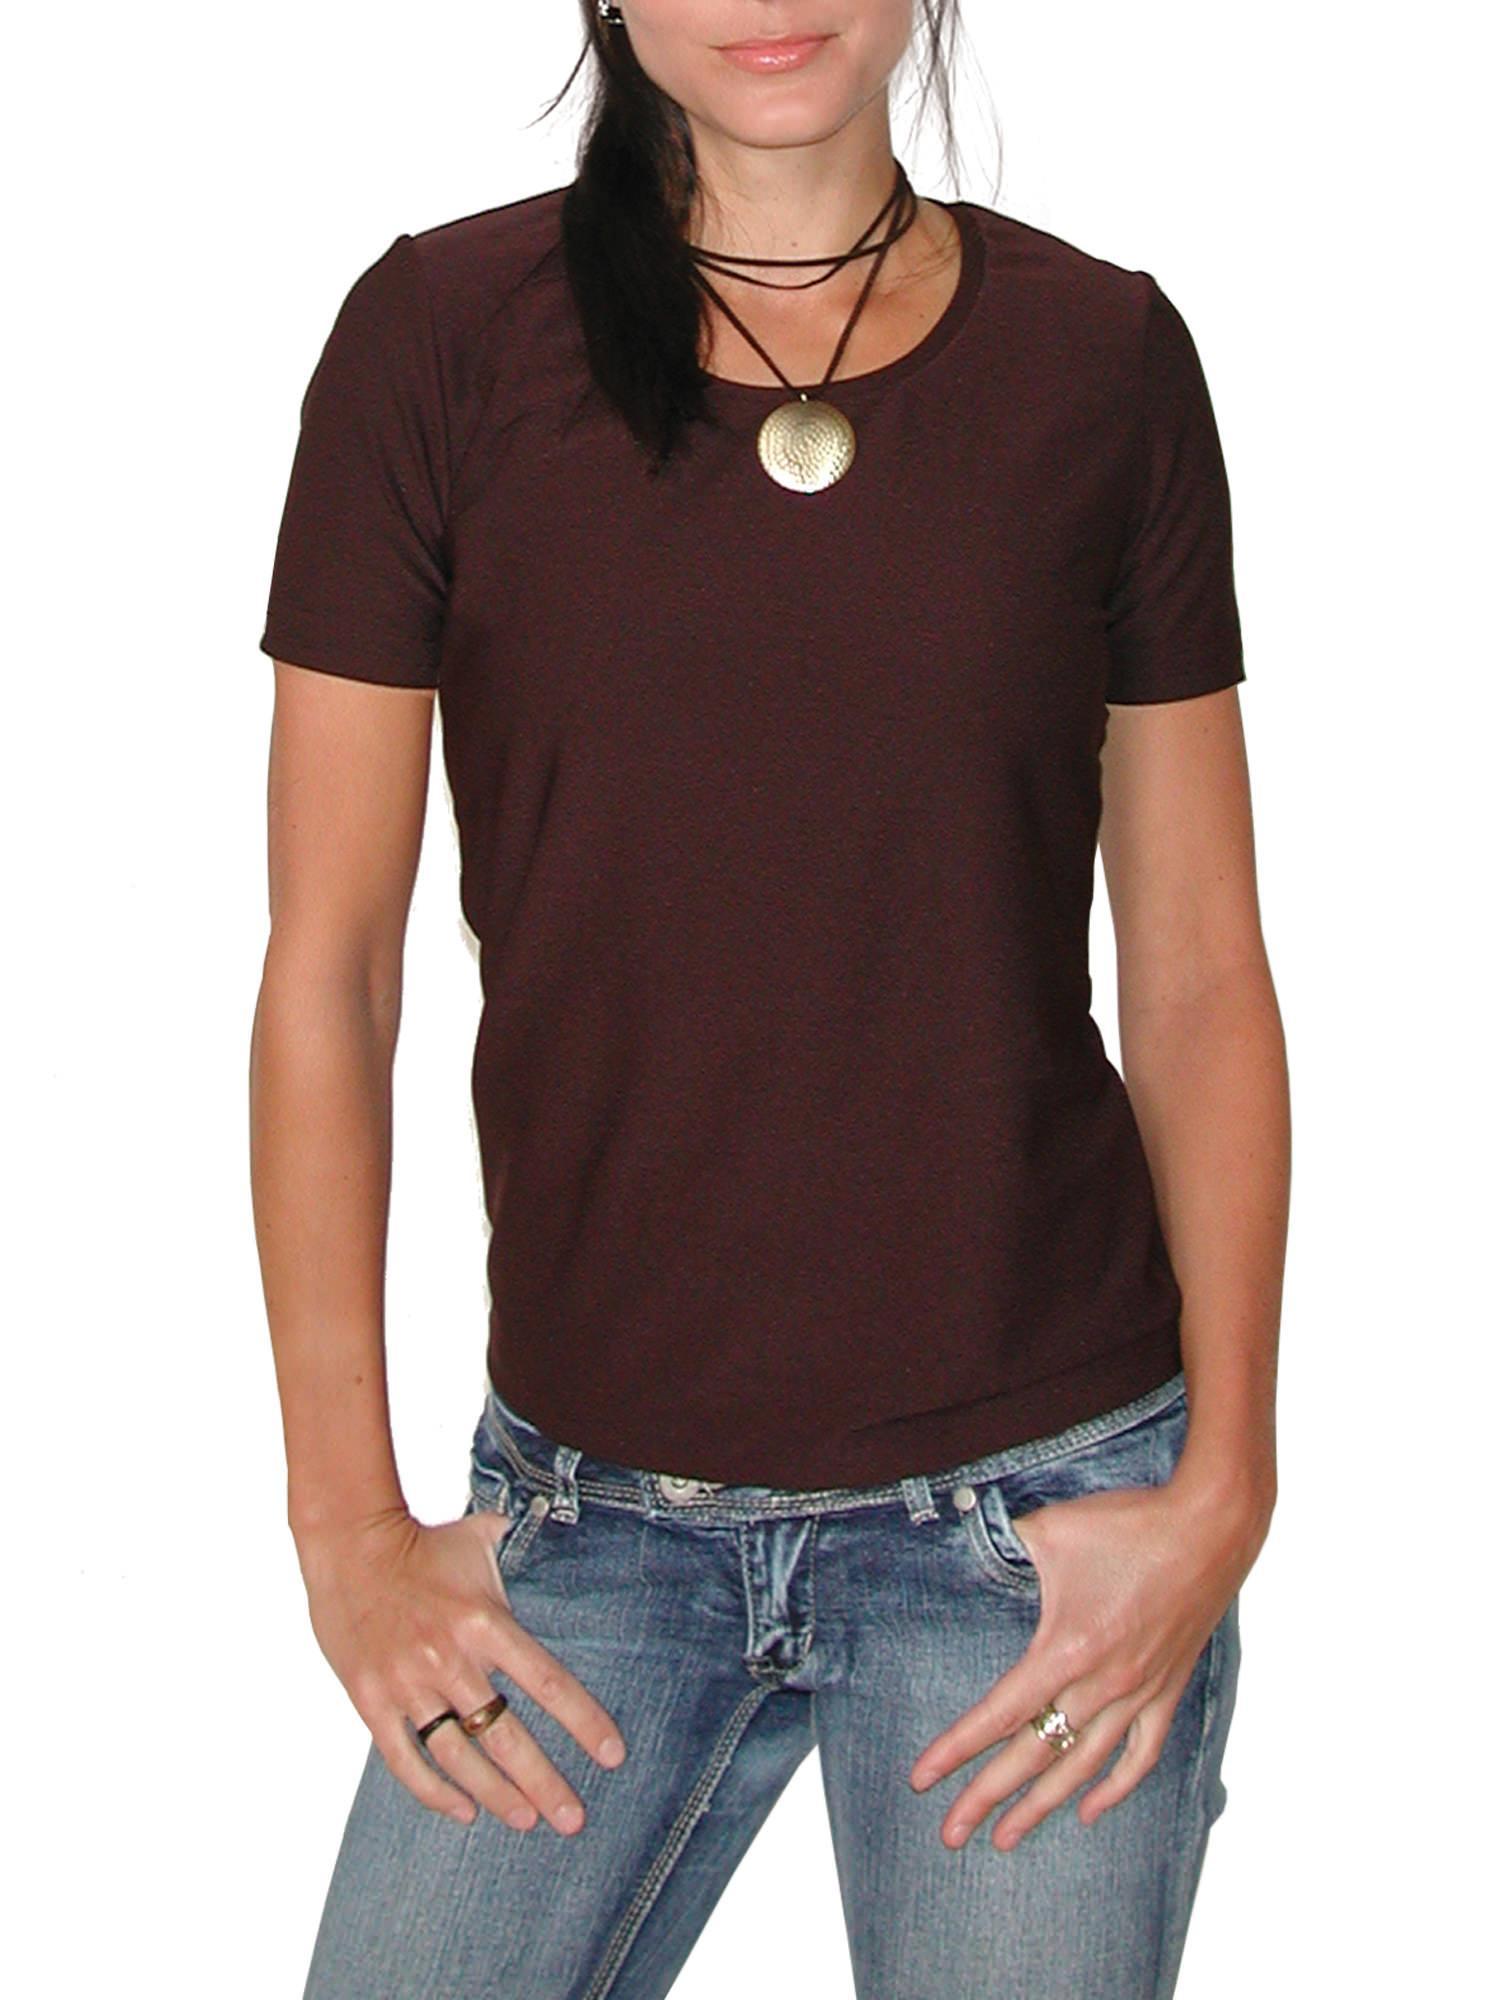 Jalie 2566 - Scoop neck t-shirt pattern with short sleeve